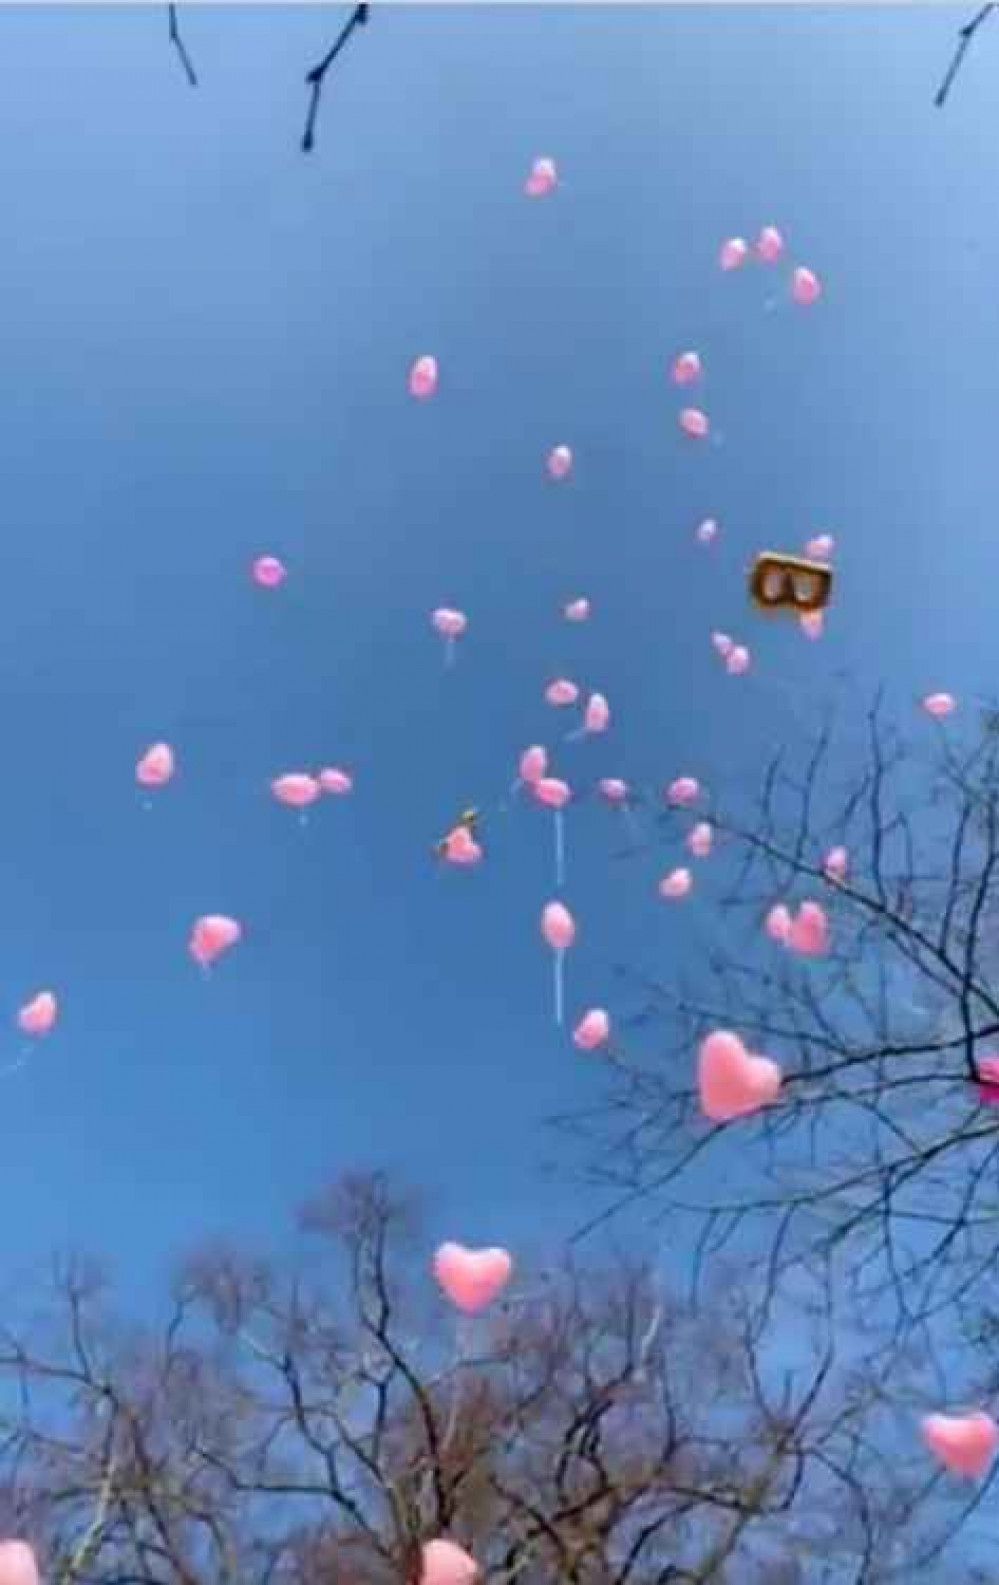 Becky Beston organised a March and balloon release to celebrate her son, Archie (Credit: @rememberingarchiebeston on Instagram)